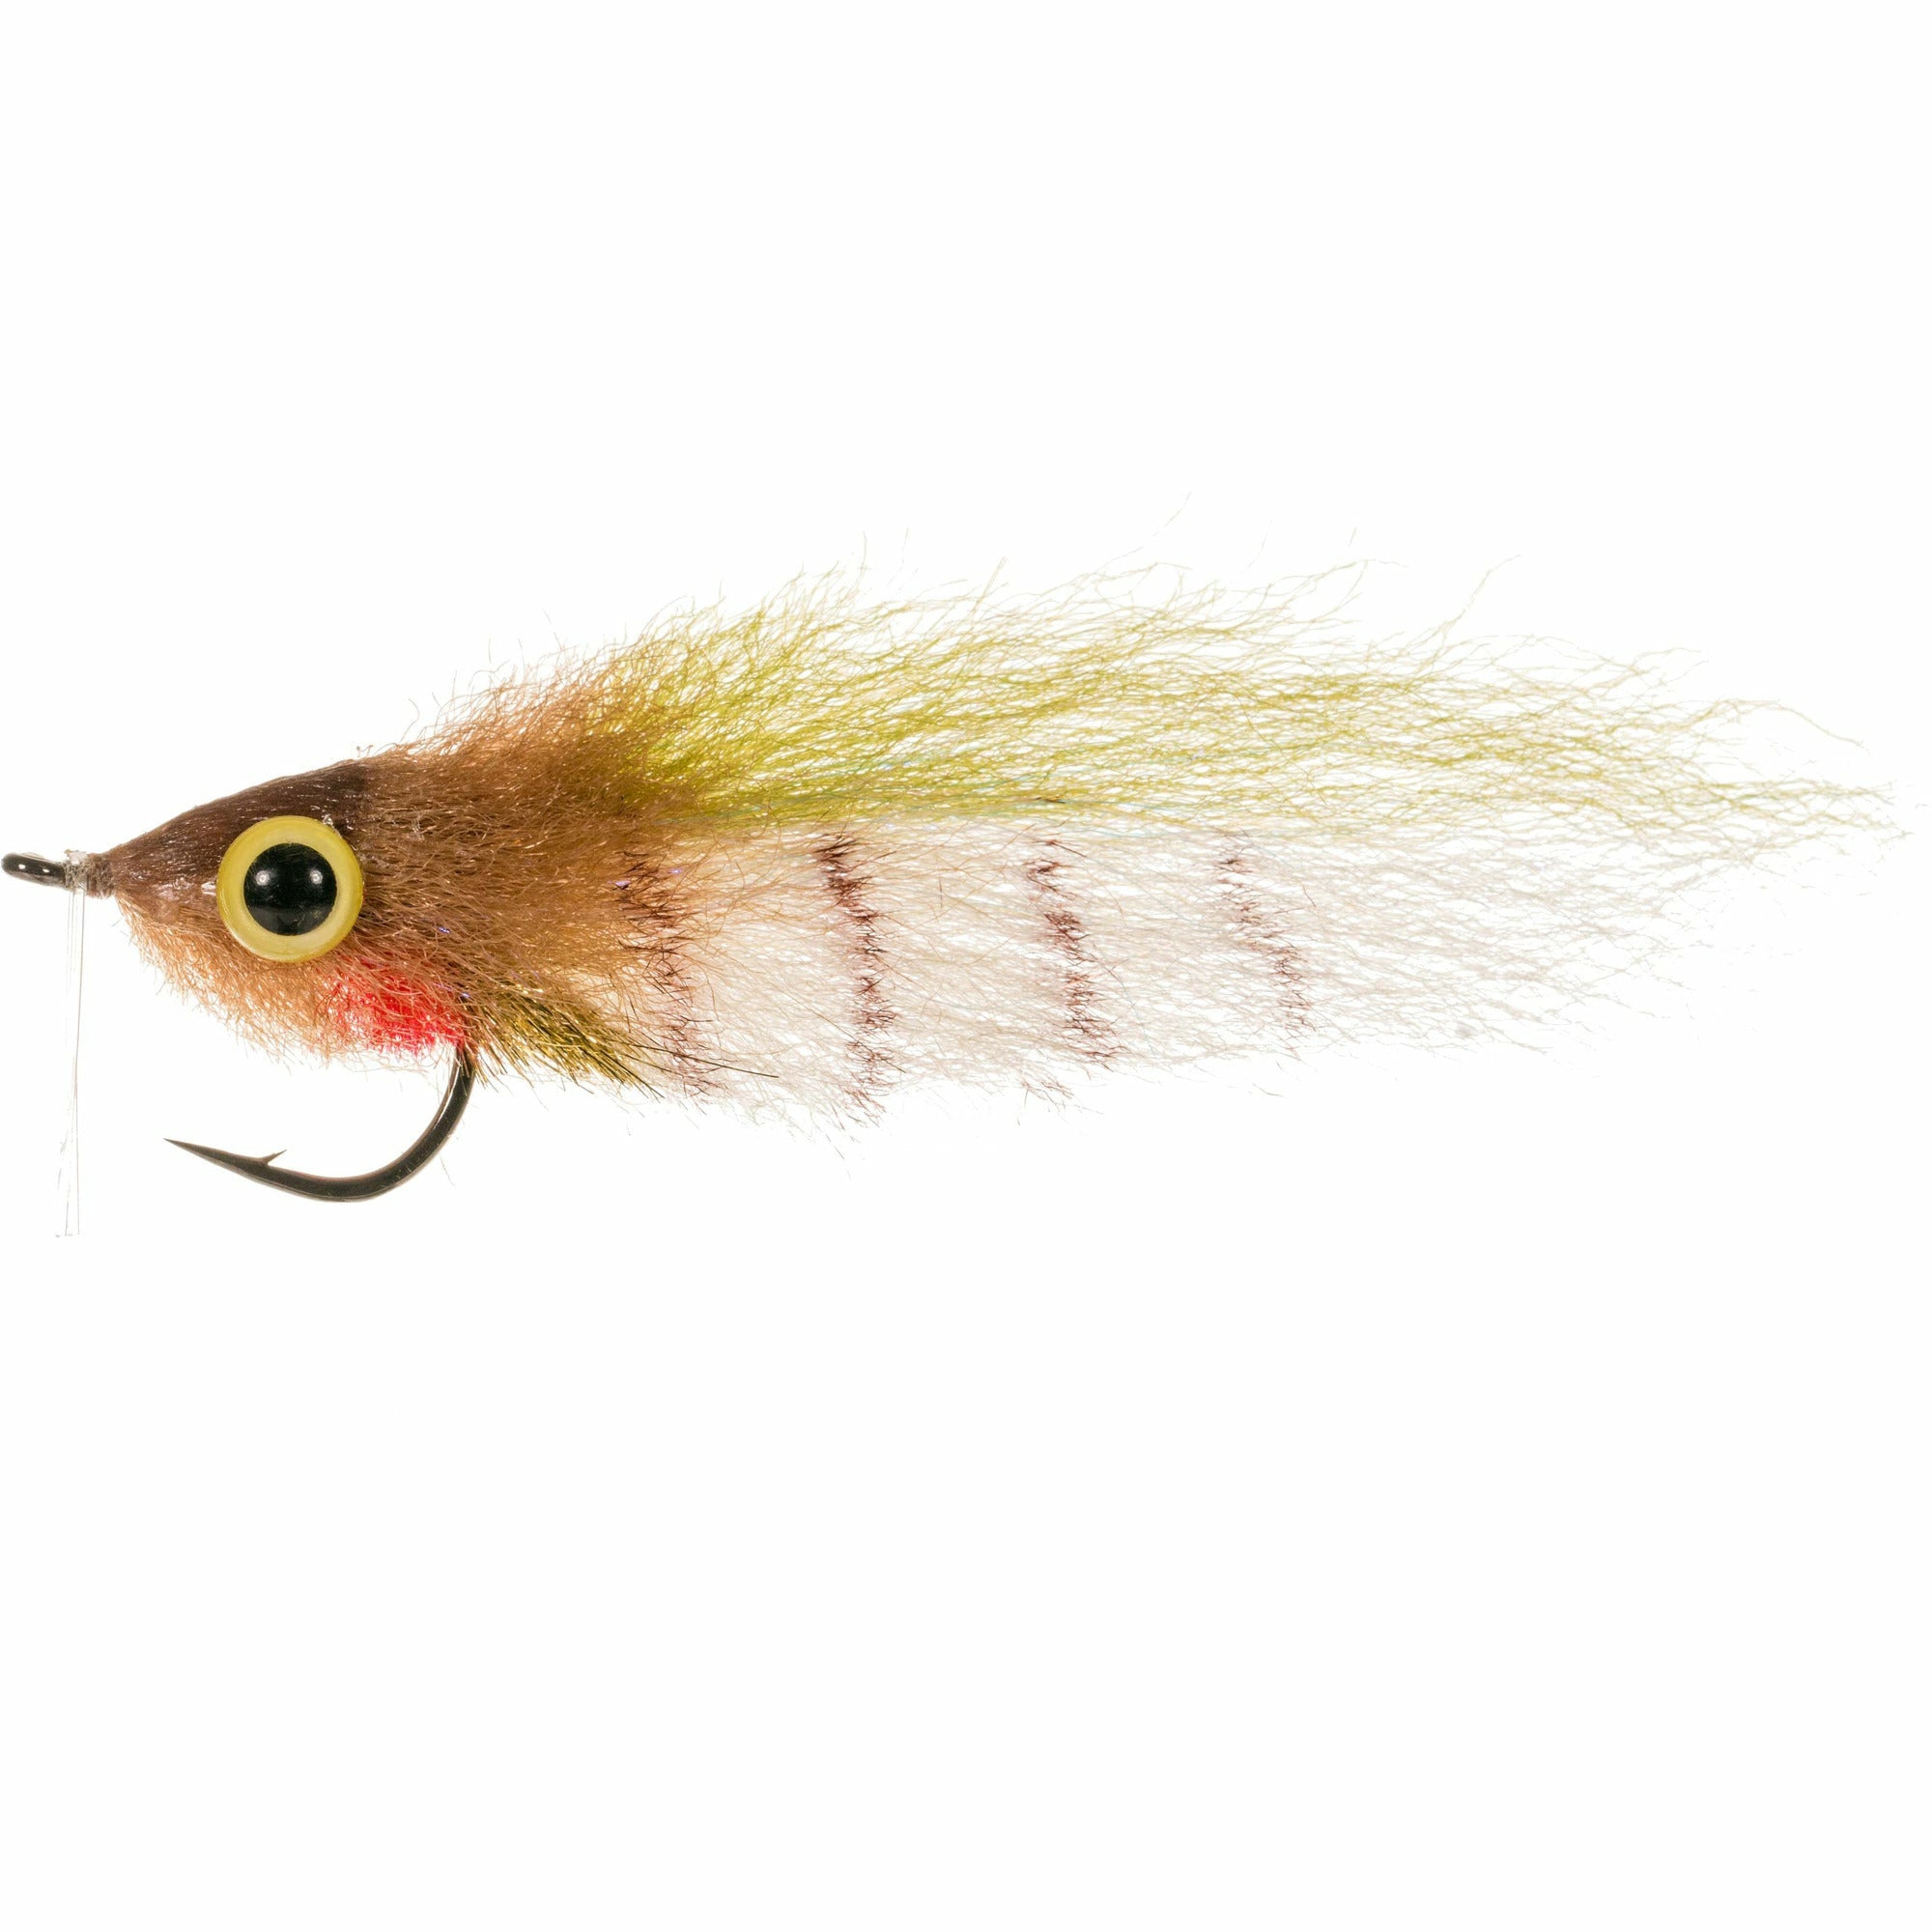 Enrico Puglisi Floating Minnow - Everglades Special - Size 2/0